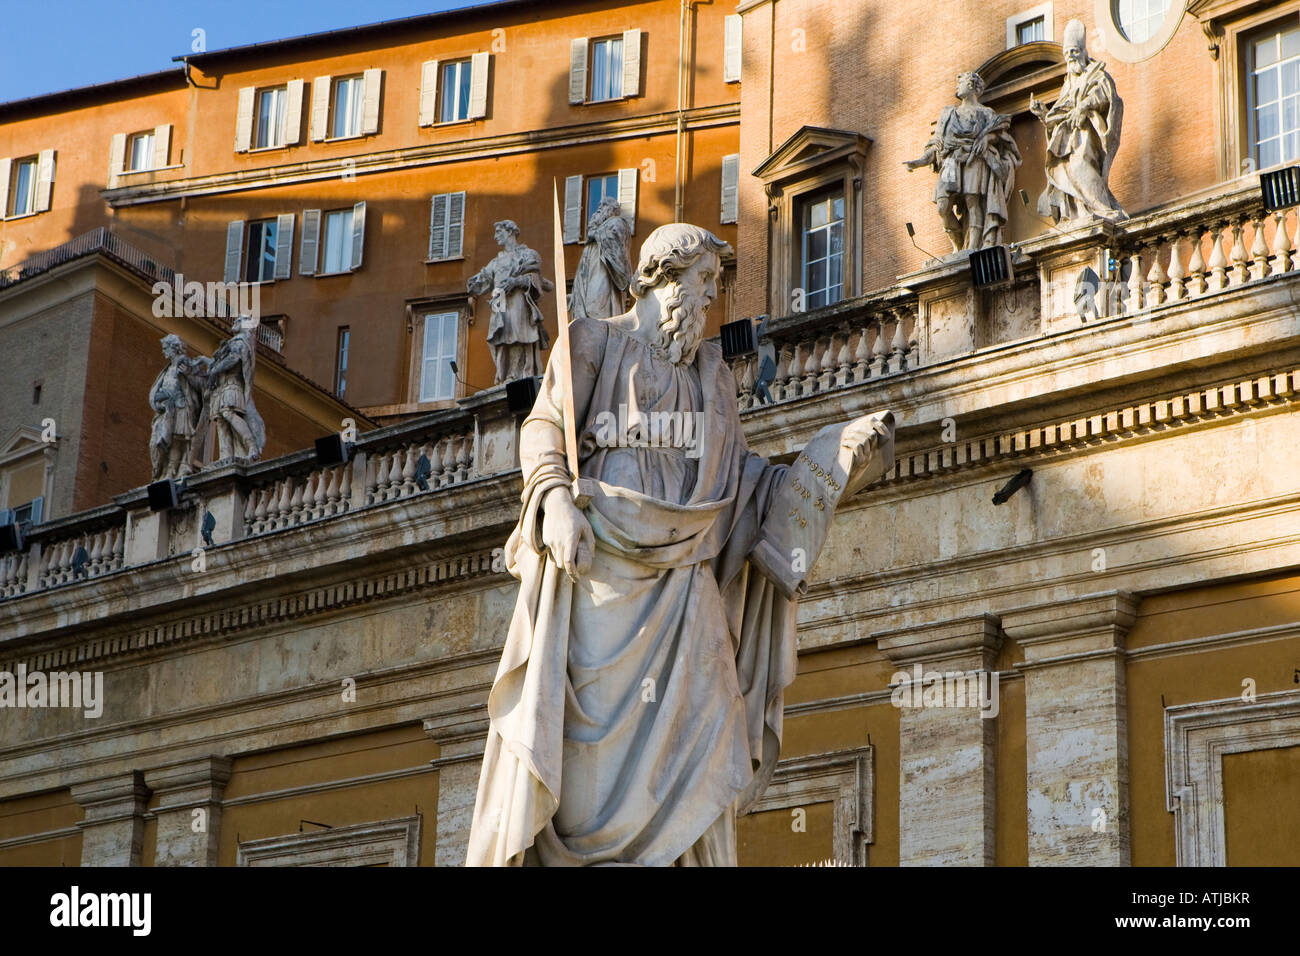 A statue in Saint Peter's Square, Vatican City, Holy See, Rome / Roma, Italy / Italia Stock Photo